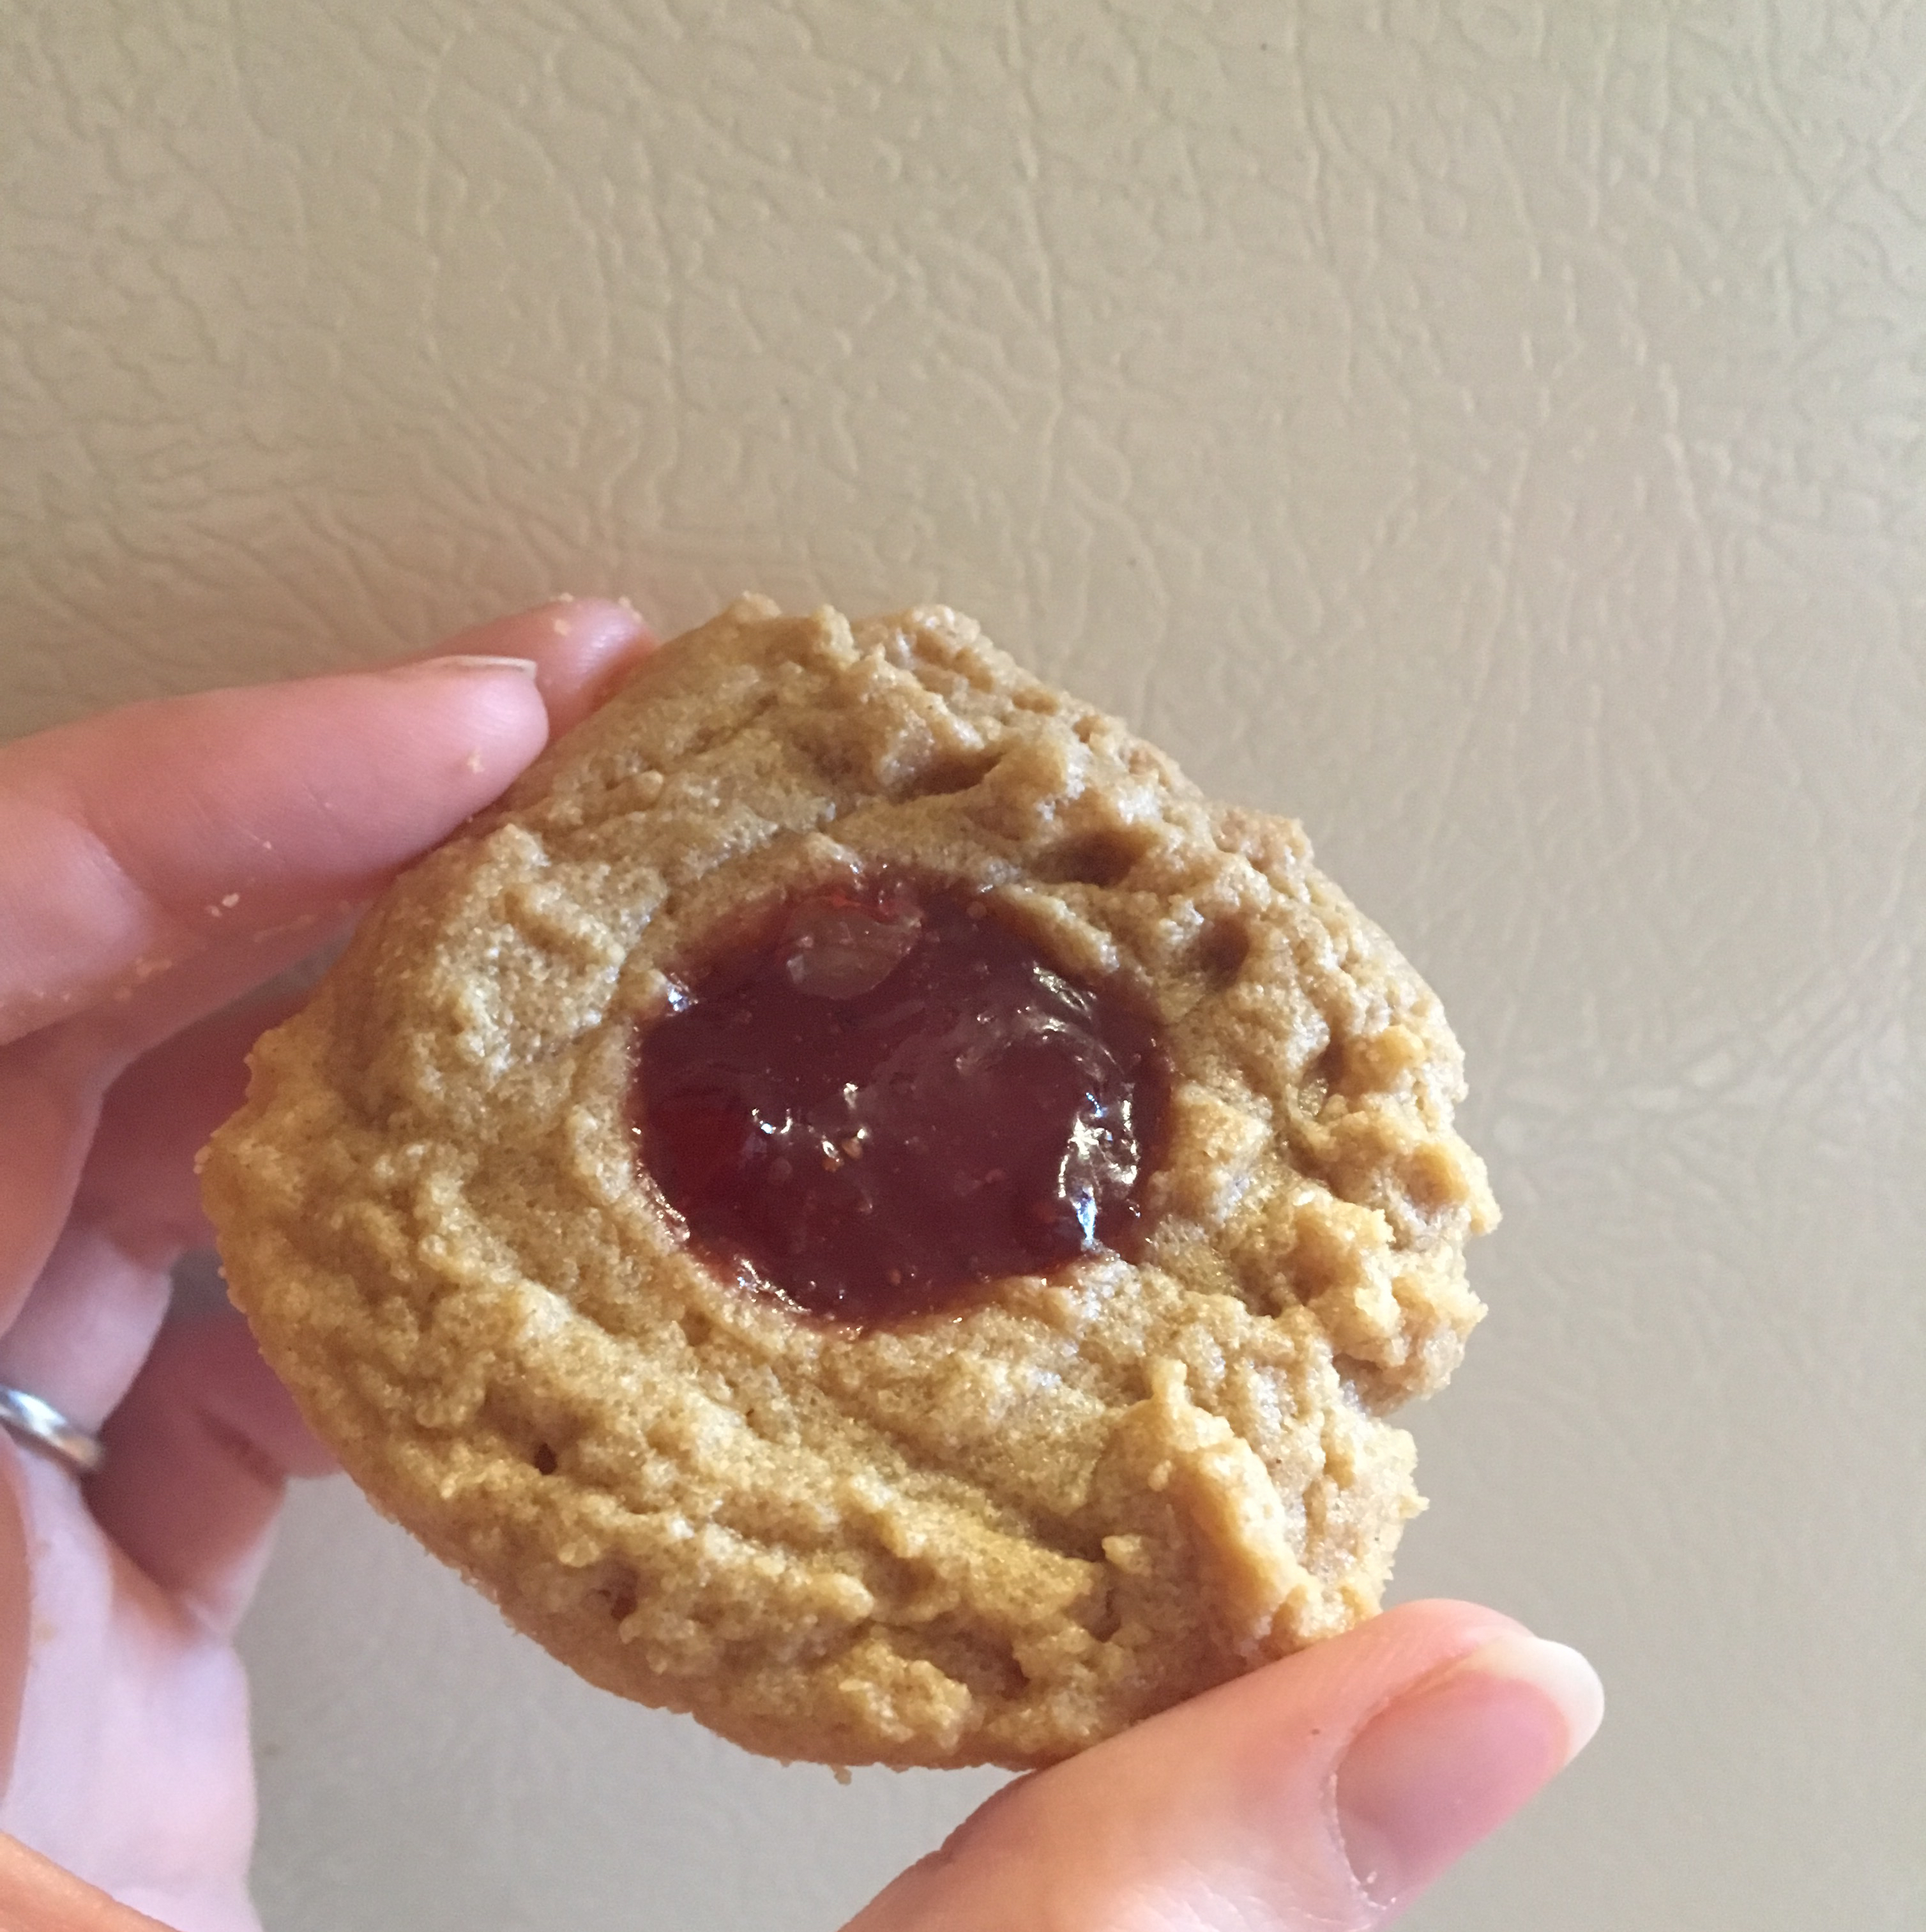 Uncle Mac's Peanut Butter and Jelly Cookies 